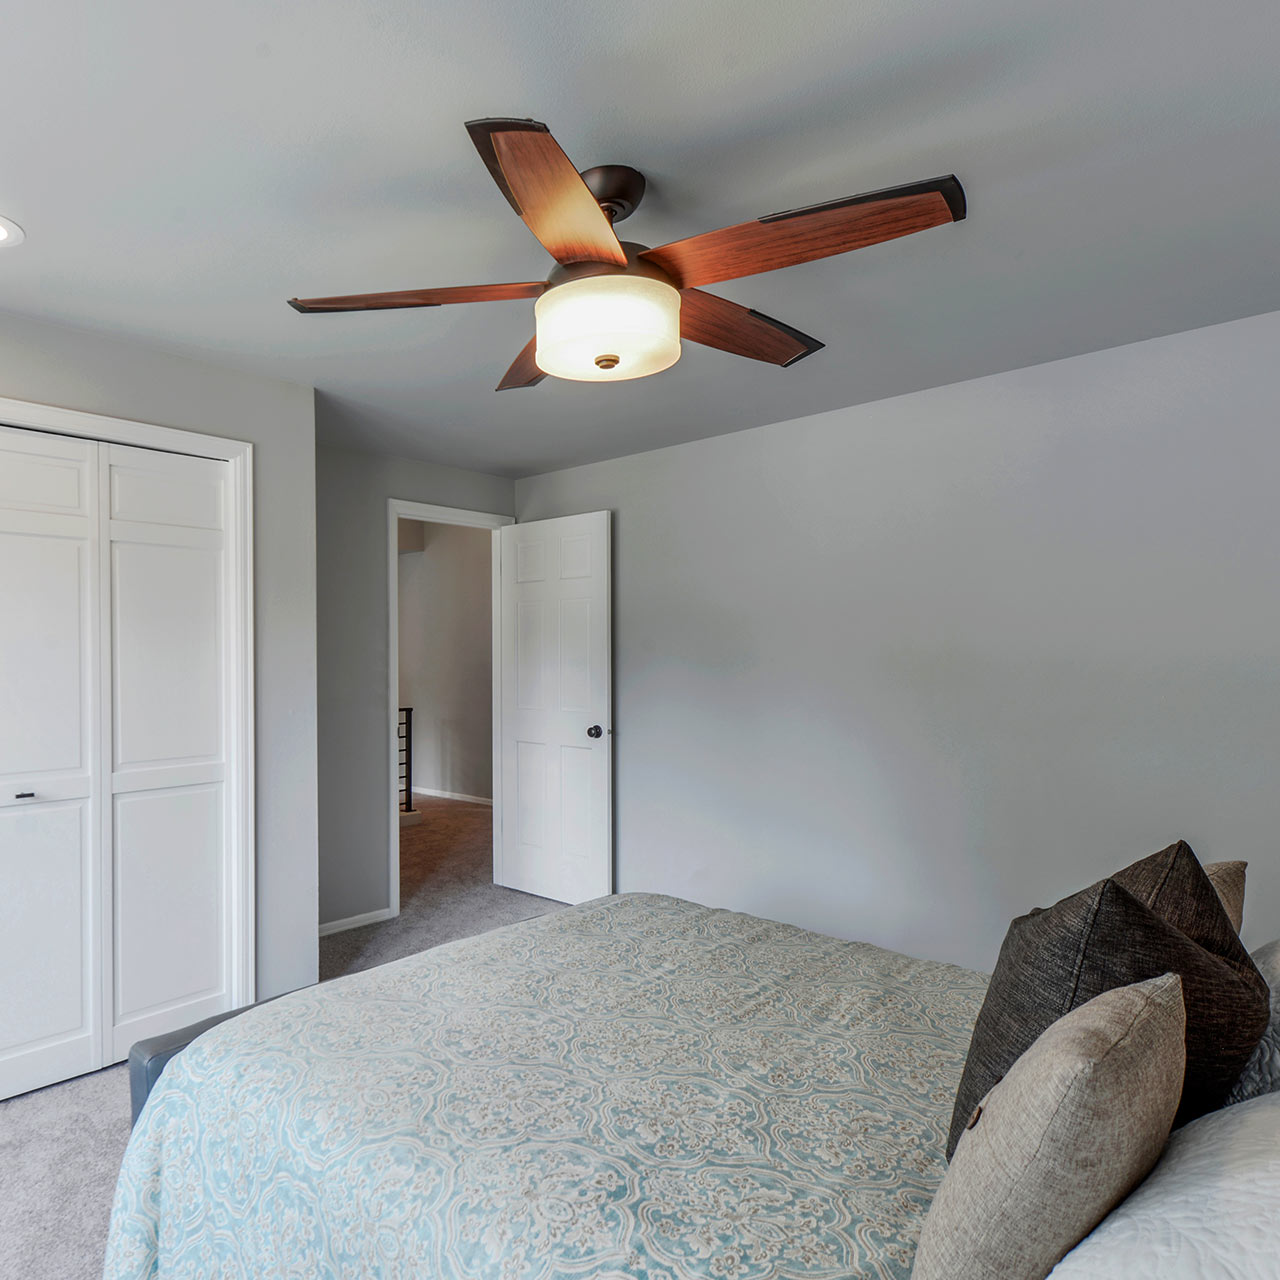 Simple bedroom interior design with a ornamental ceiling fans and hi-tech silent fan designs